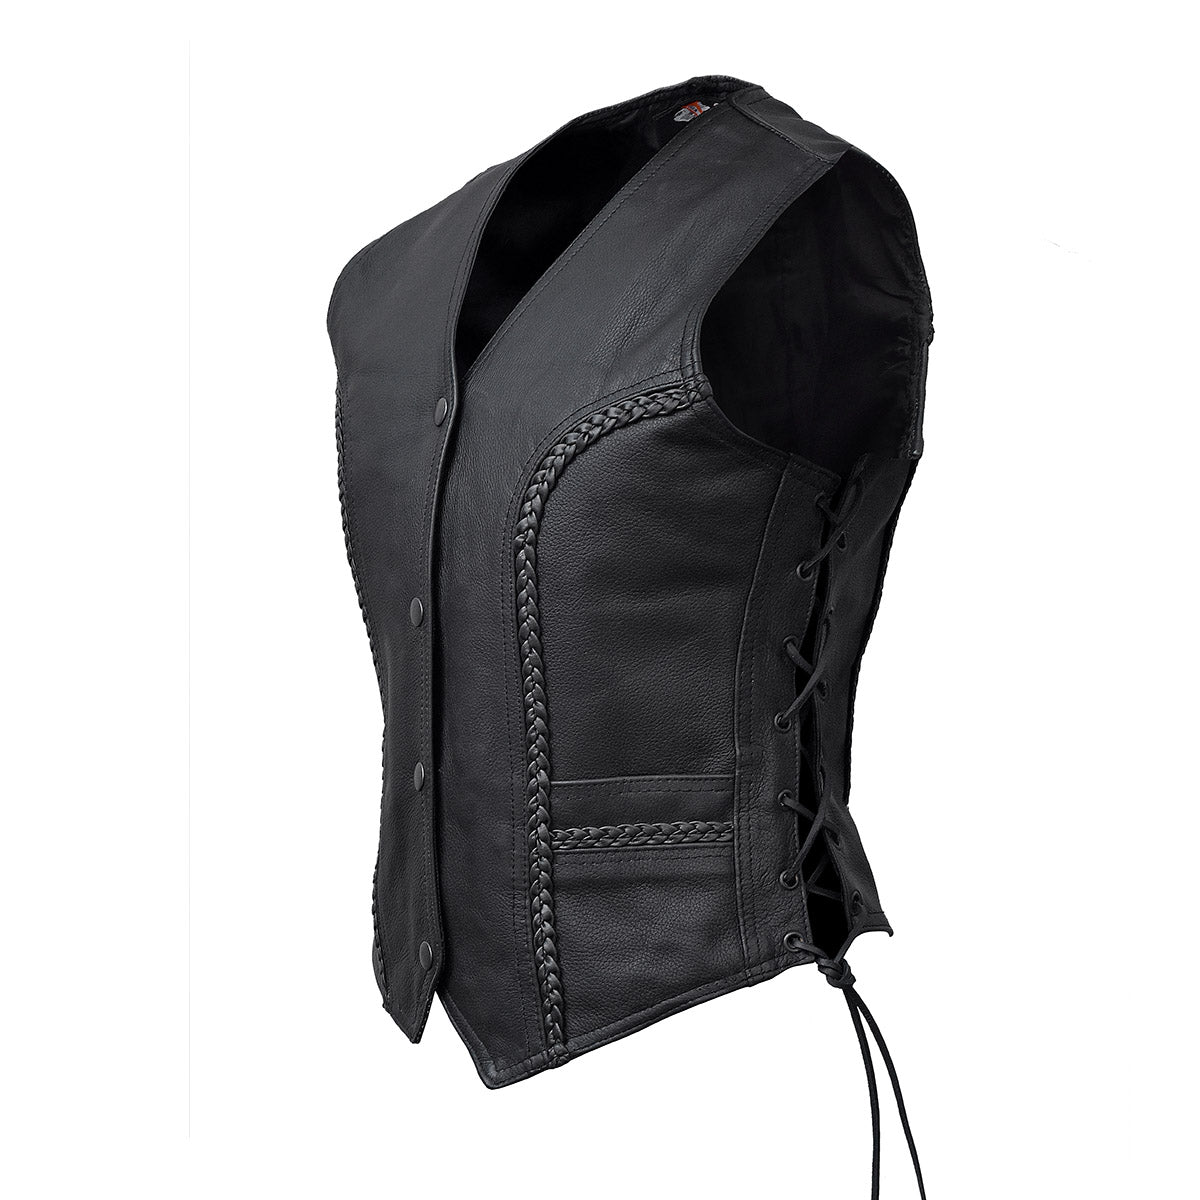 VL1051 Ladies Lace Side Vest with Gun Pockets and Trimmed In Braid